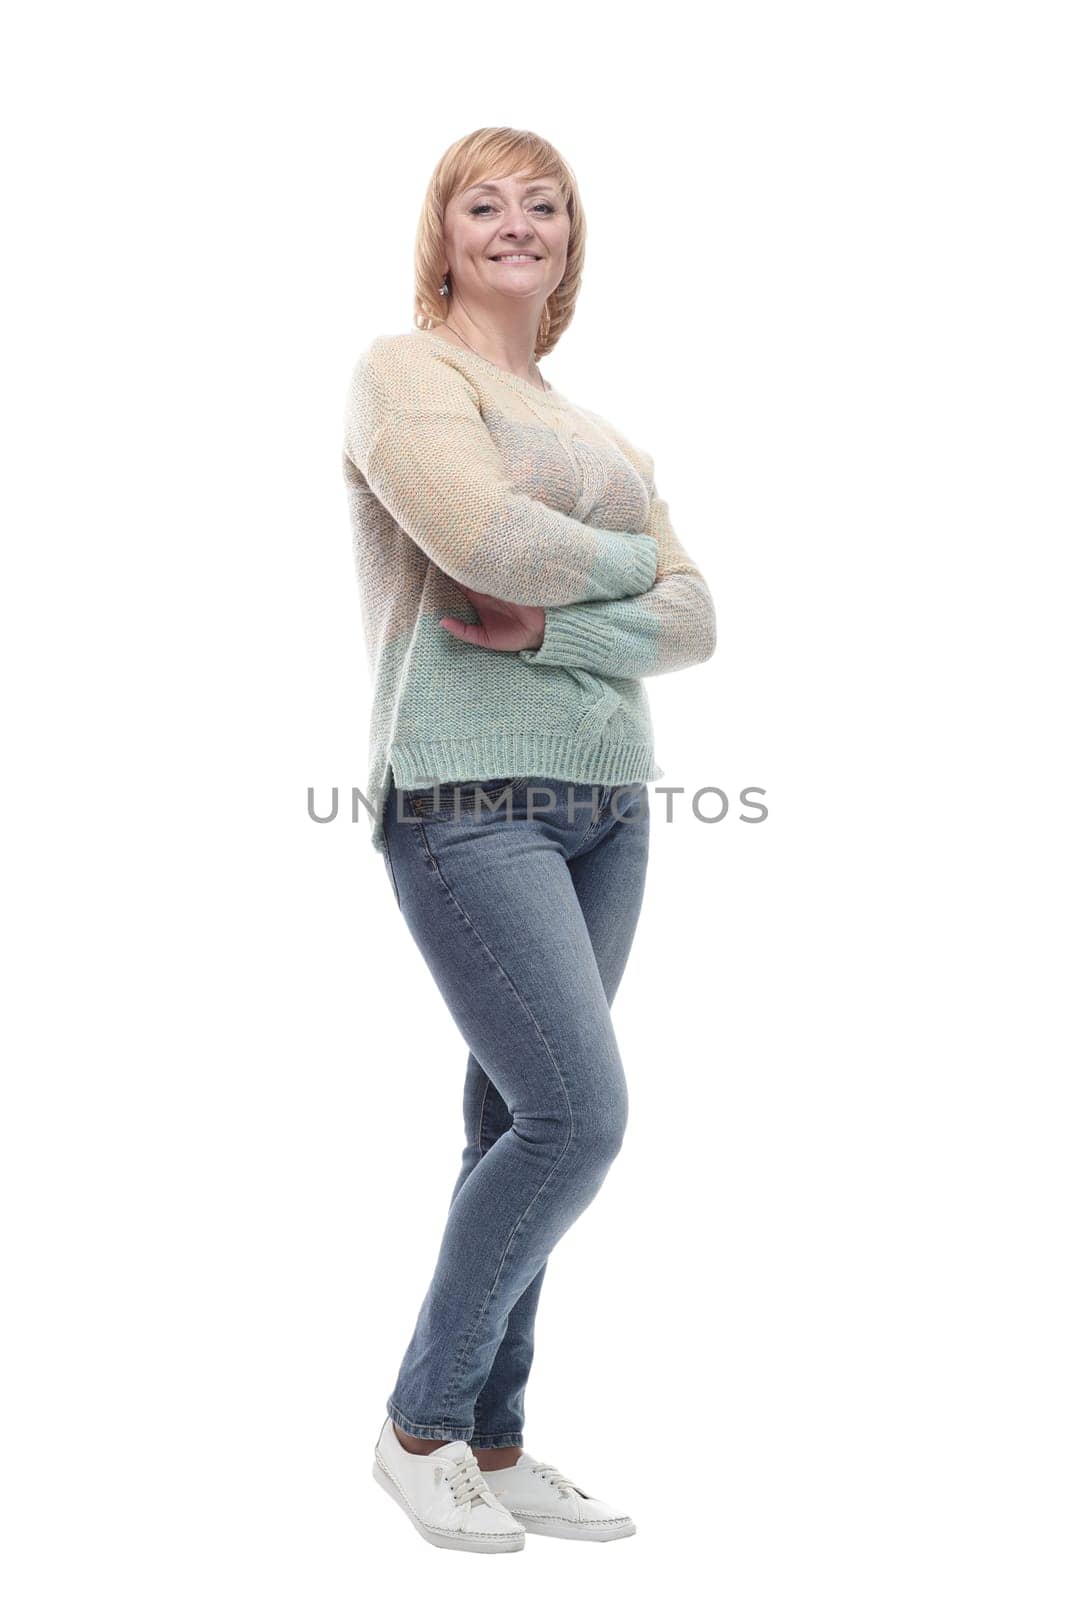 casual smiling woman in jeans and a white jumper. by asdf